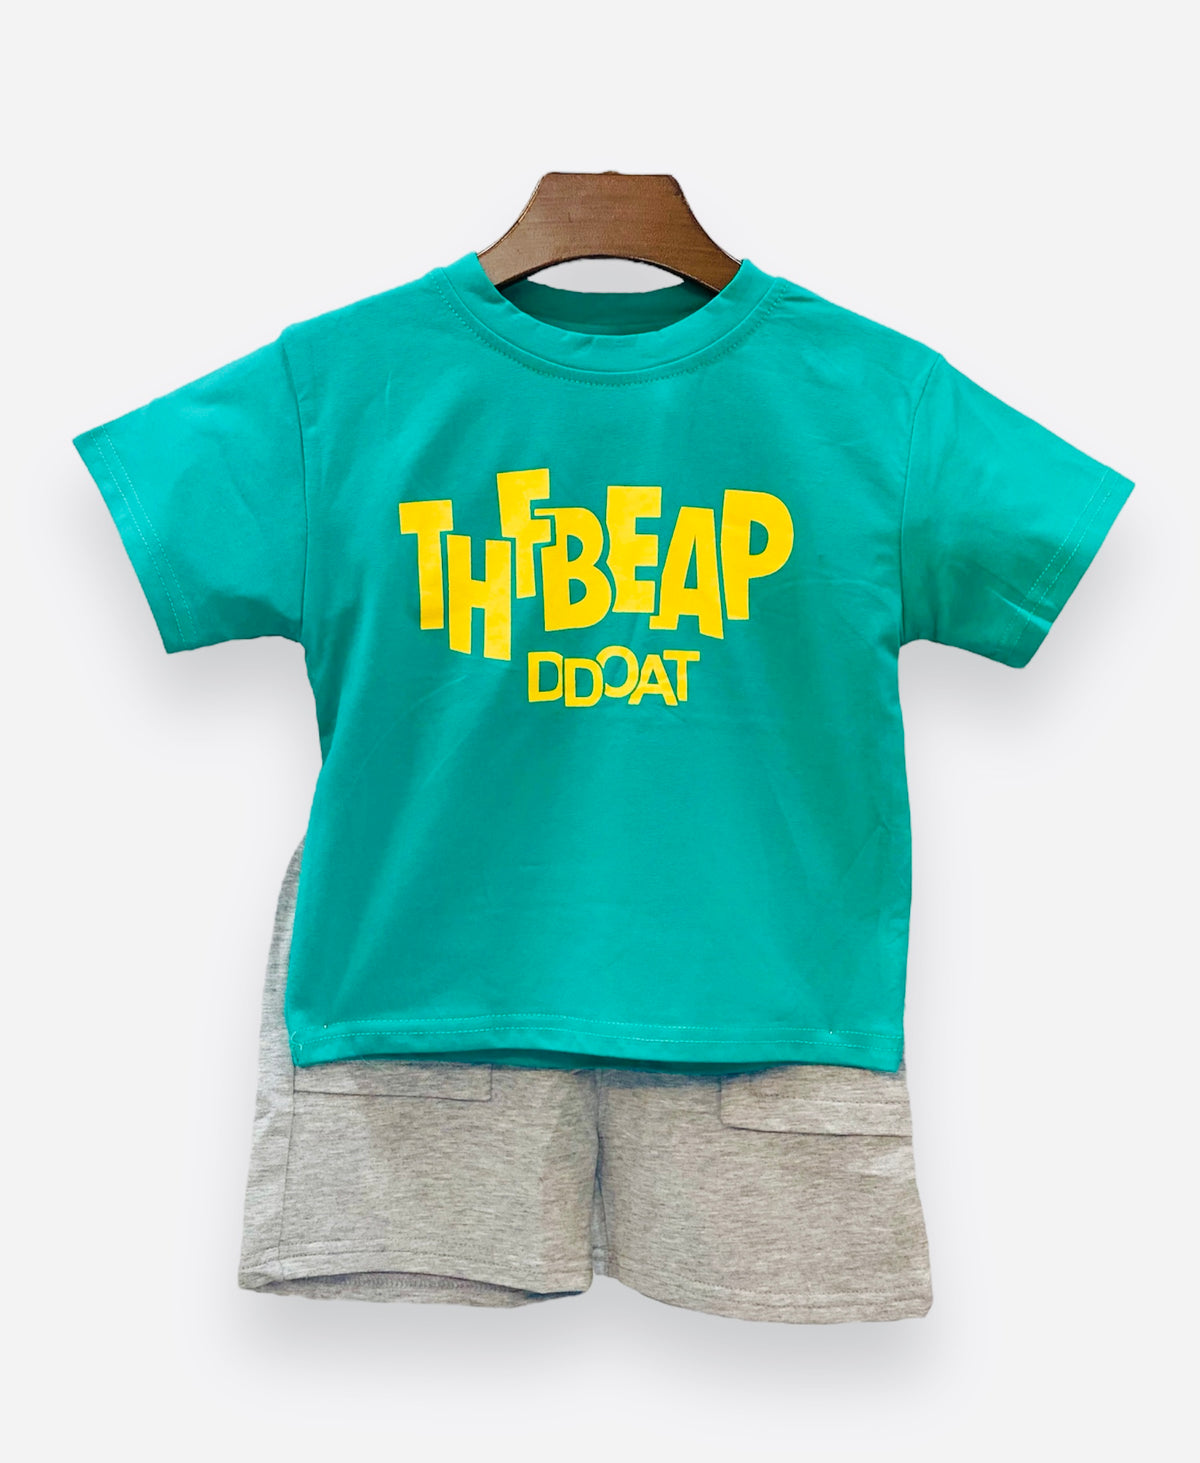 2PC Baby Boy The Beap Suit Green